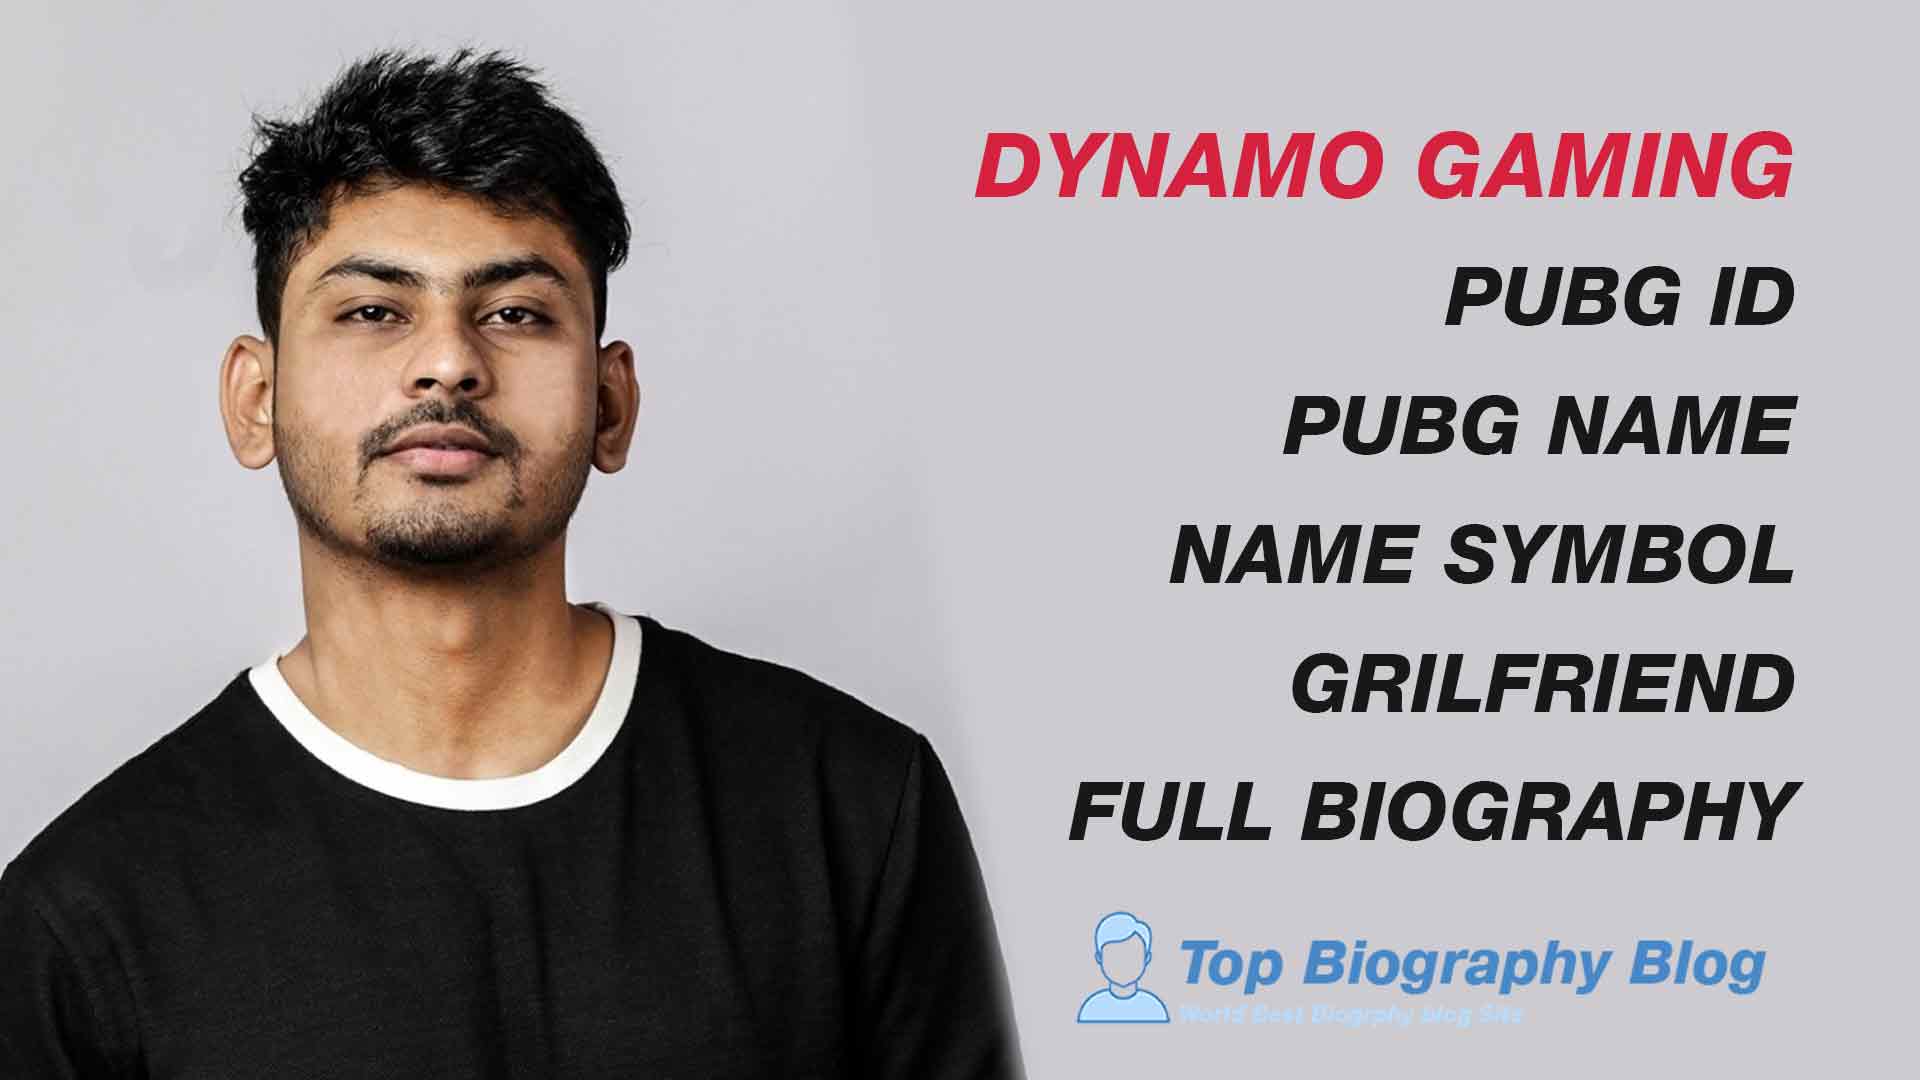 lets talk about dynamo gaming and dynamo instagram, logo, pubg id,real name, gaming face and more